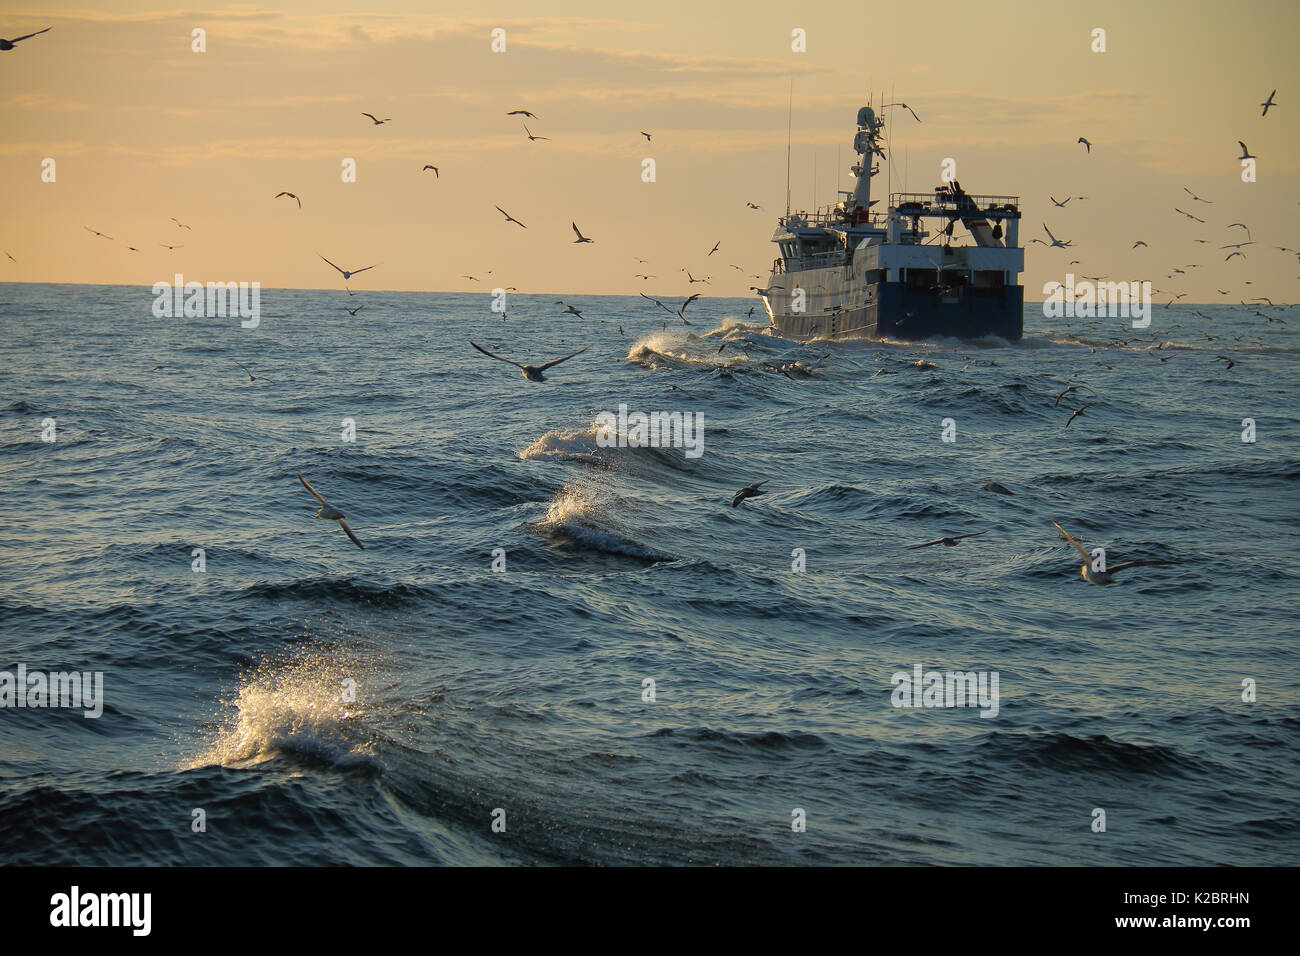 Fishing vessel 'Ocean Harvest' returning home, North Sea, UK, August 2014. Property released.  All non-editorial uses must be cleared individually. Stock Photo